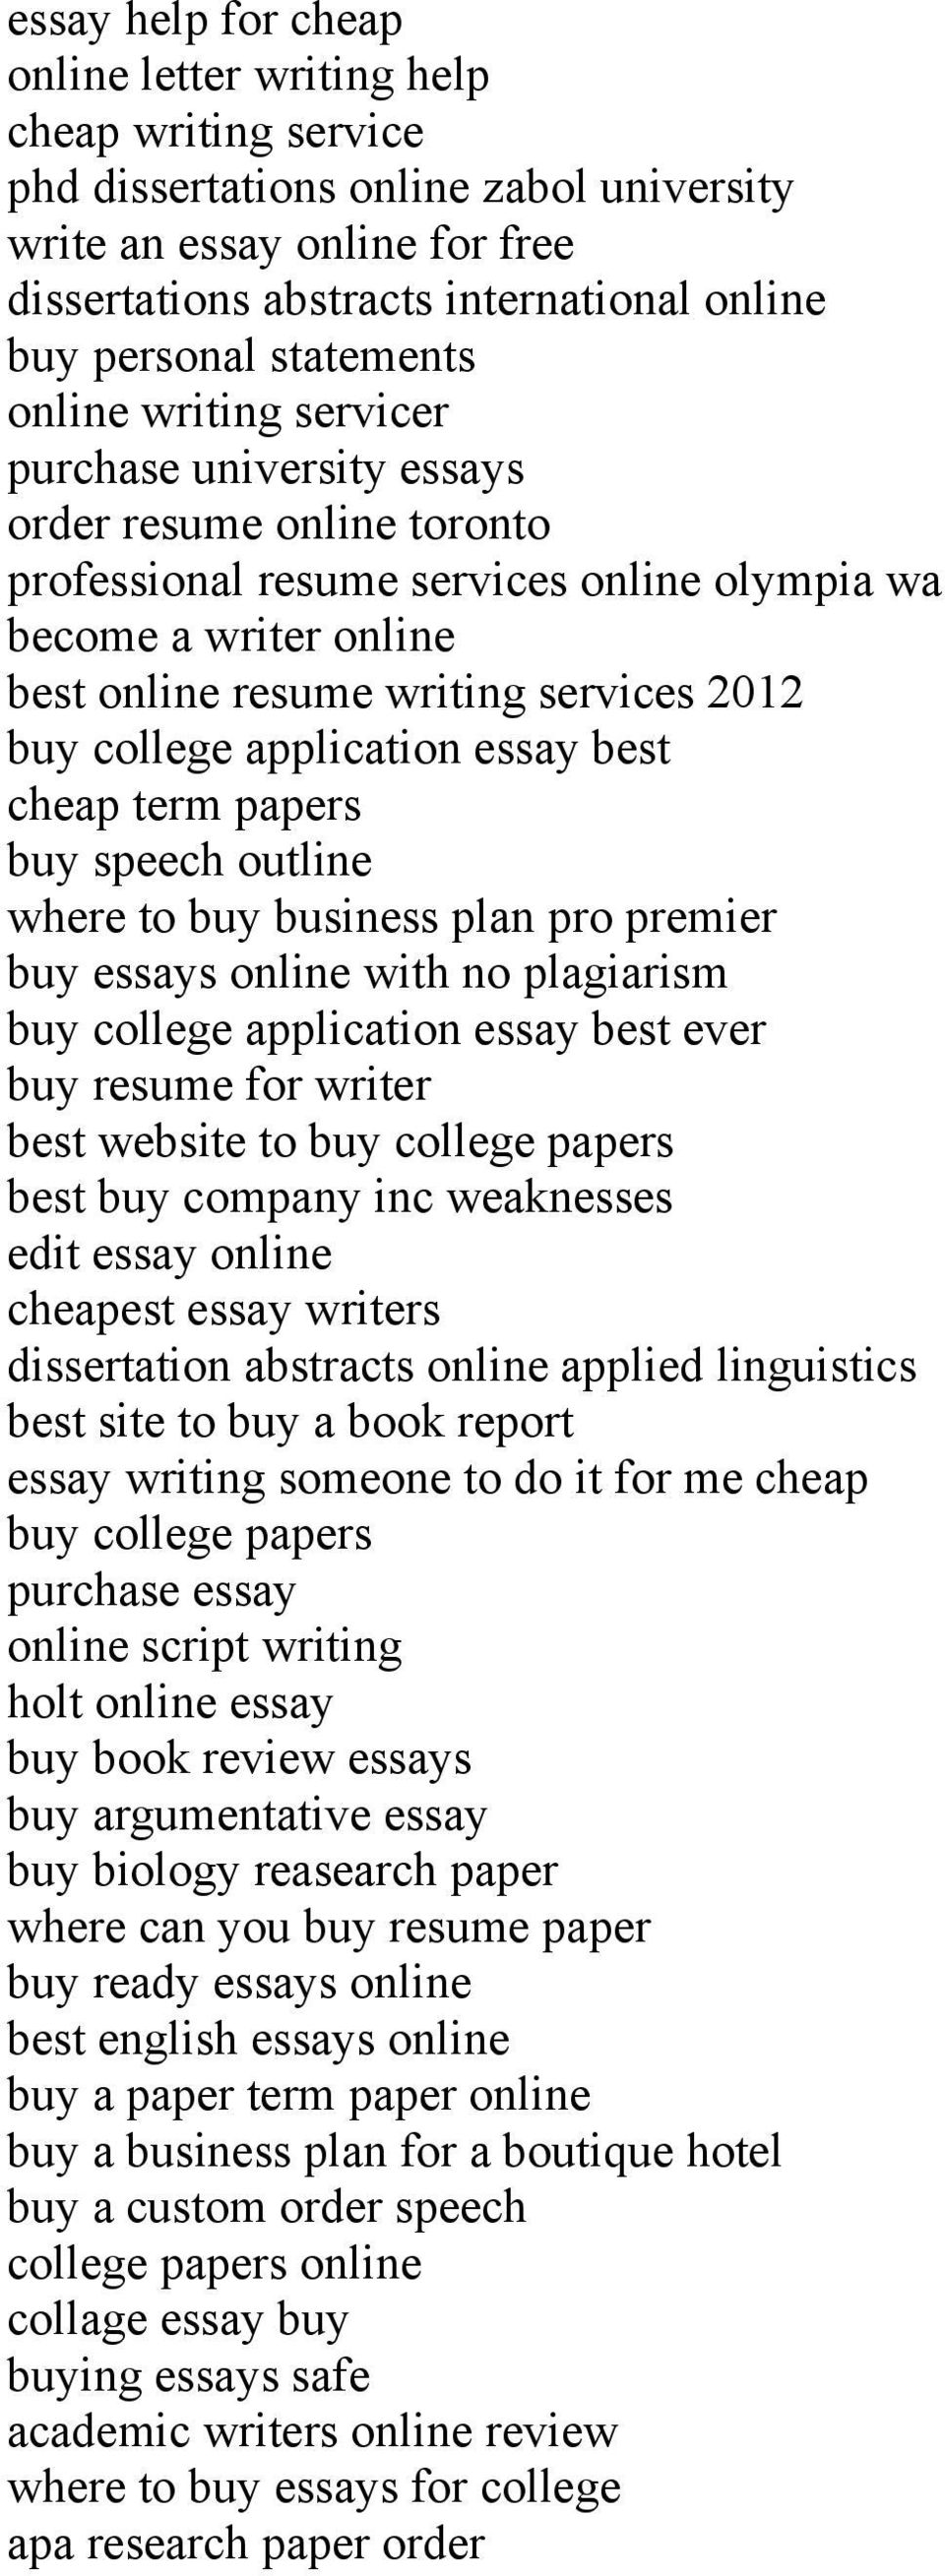 services 2012 buy college application essay best cheap term papers buy speech outline where to buy business plan pro premier buy essays online with no plagiarism buy college application essay best